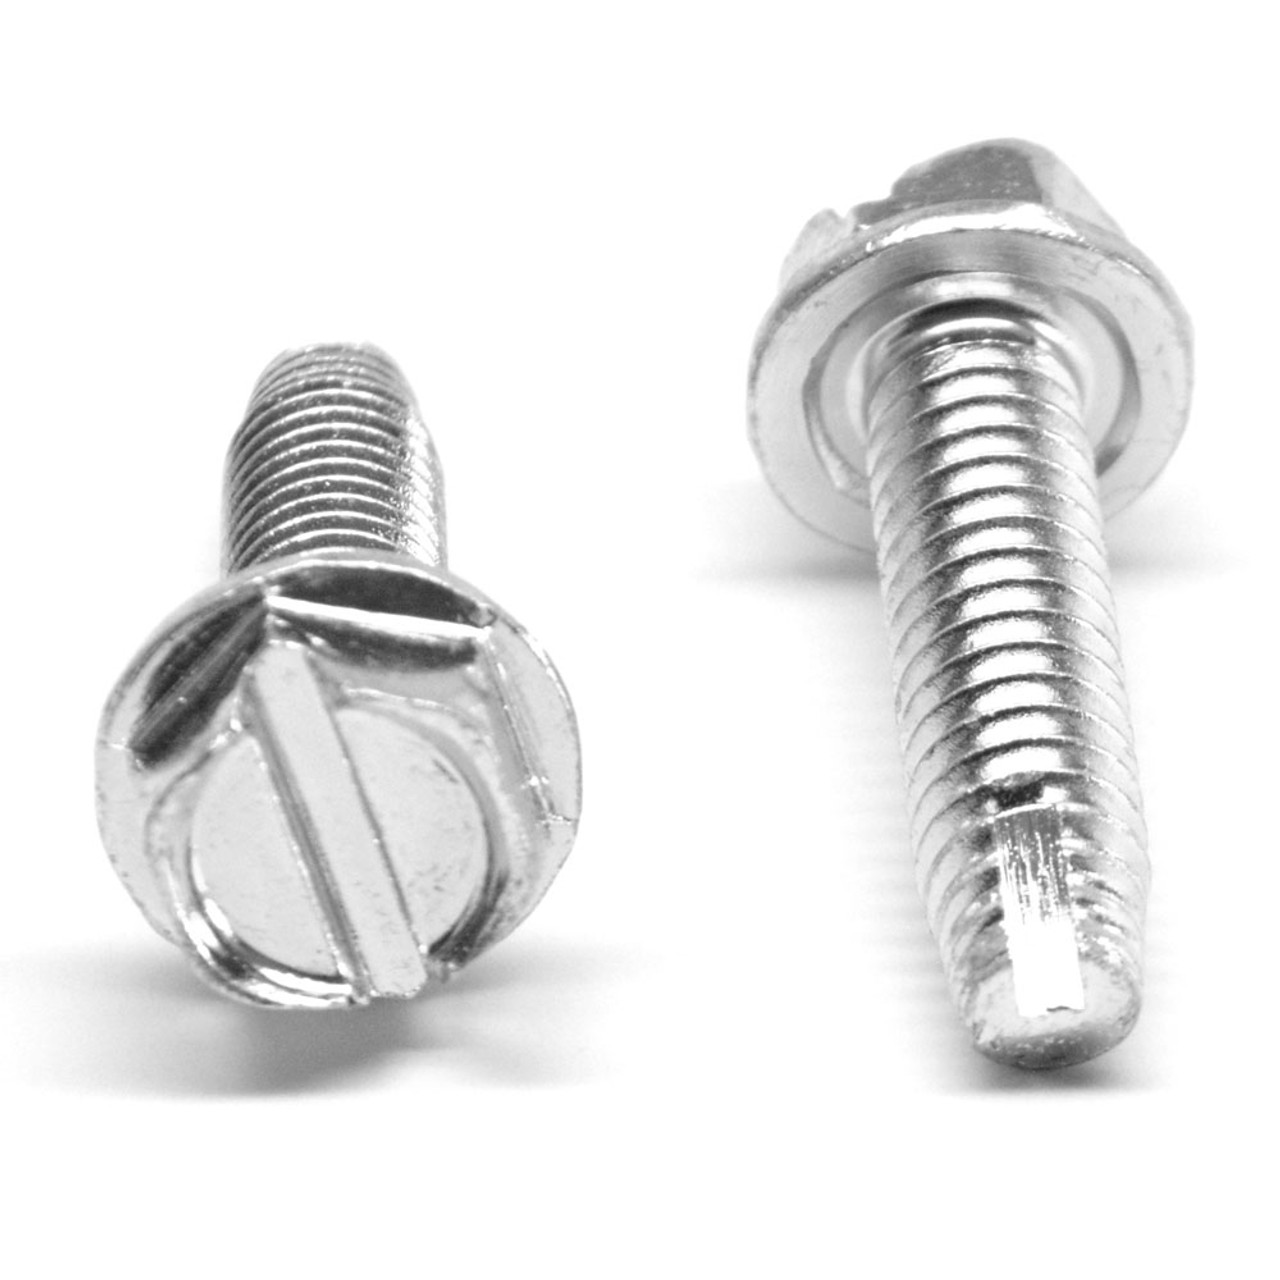 #8-32 x 5/8" (FT) Coarse Thread Thread Cutting Screw Slotted Hex Washer Head Type 1 Low Carbon Steel Zinc Plated